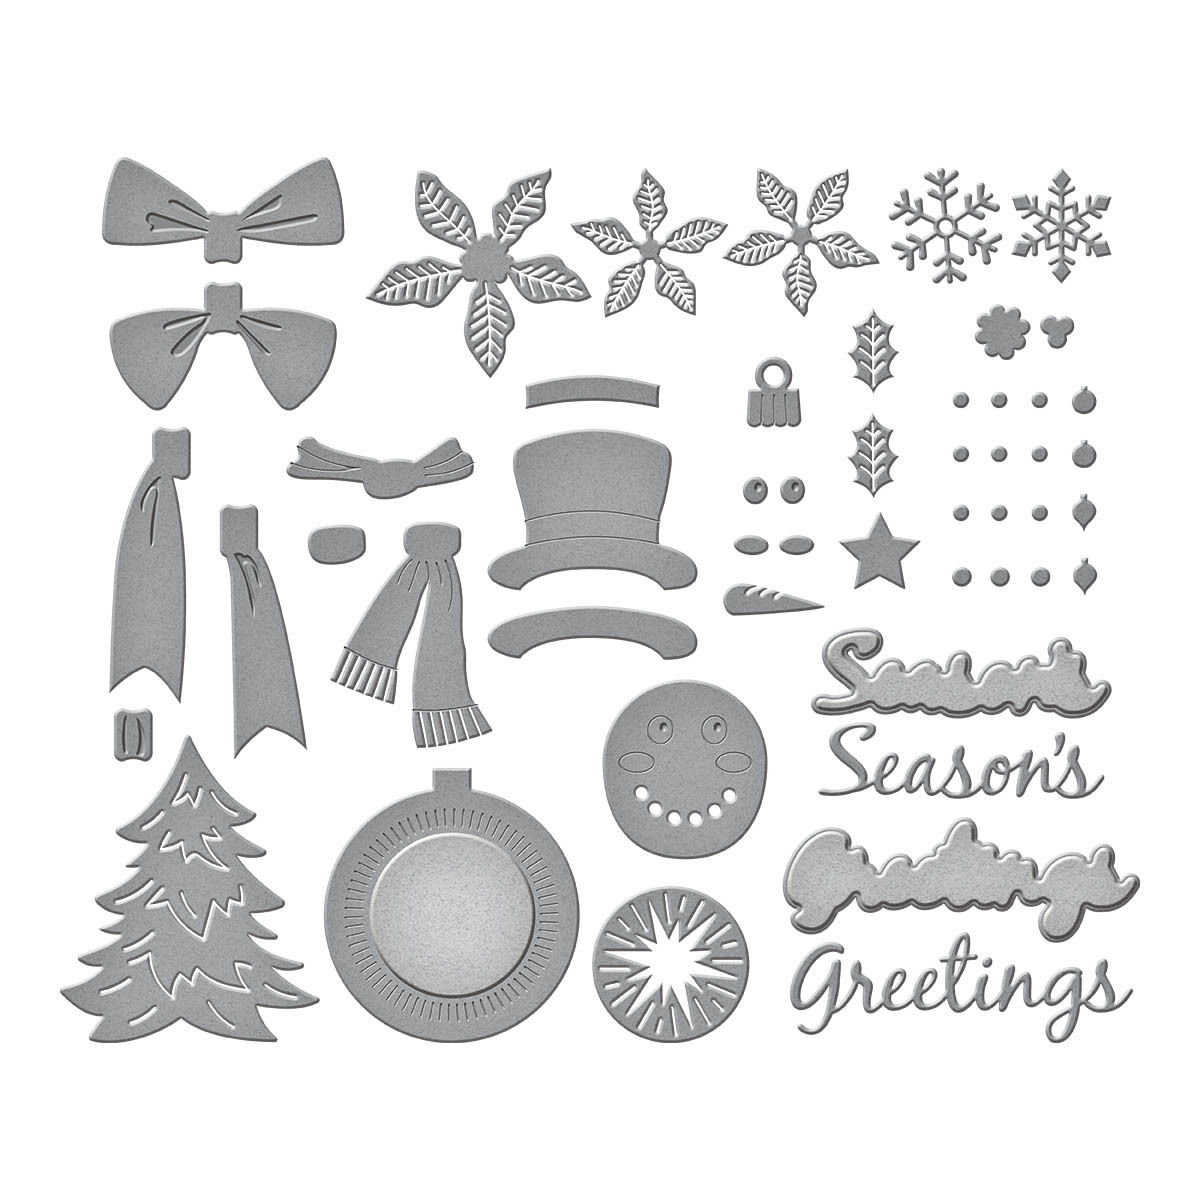 Spellbinderschristmas Wreath Add-ons Etched Dies From the Beautiful Wreaths Collection